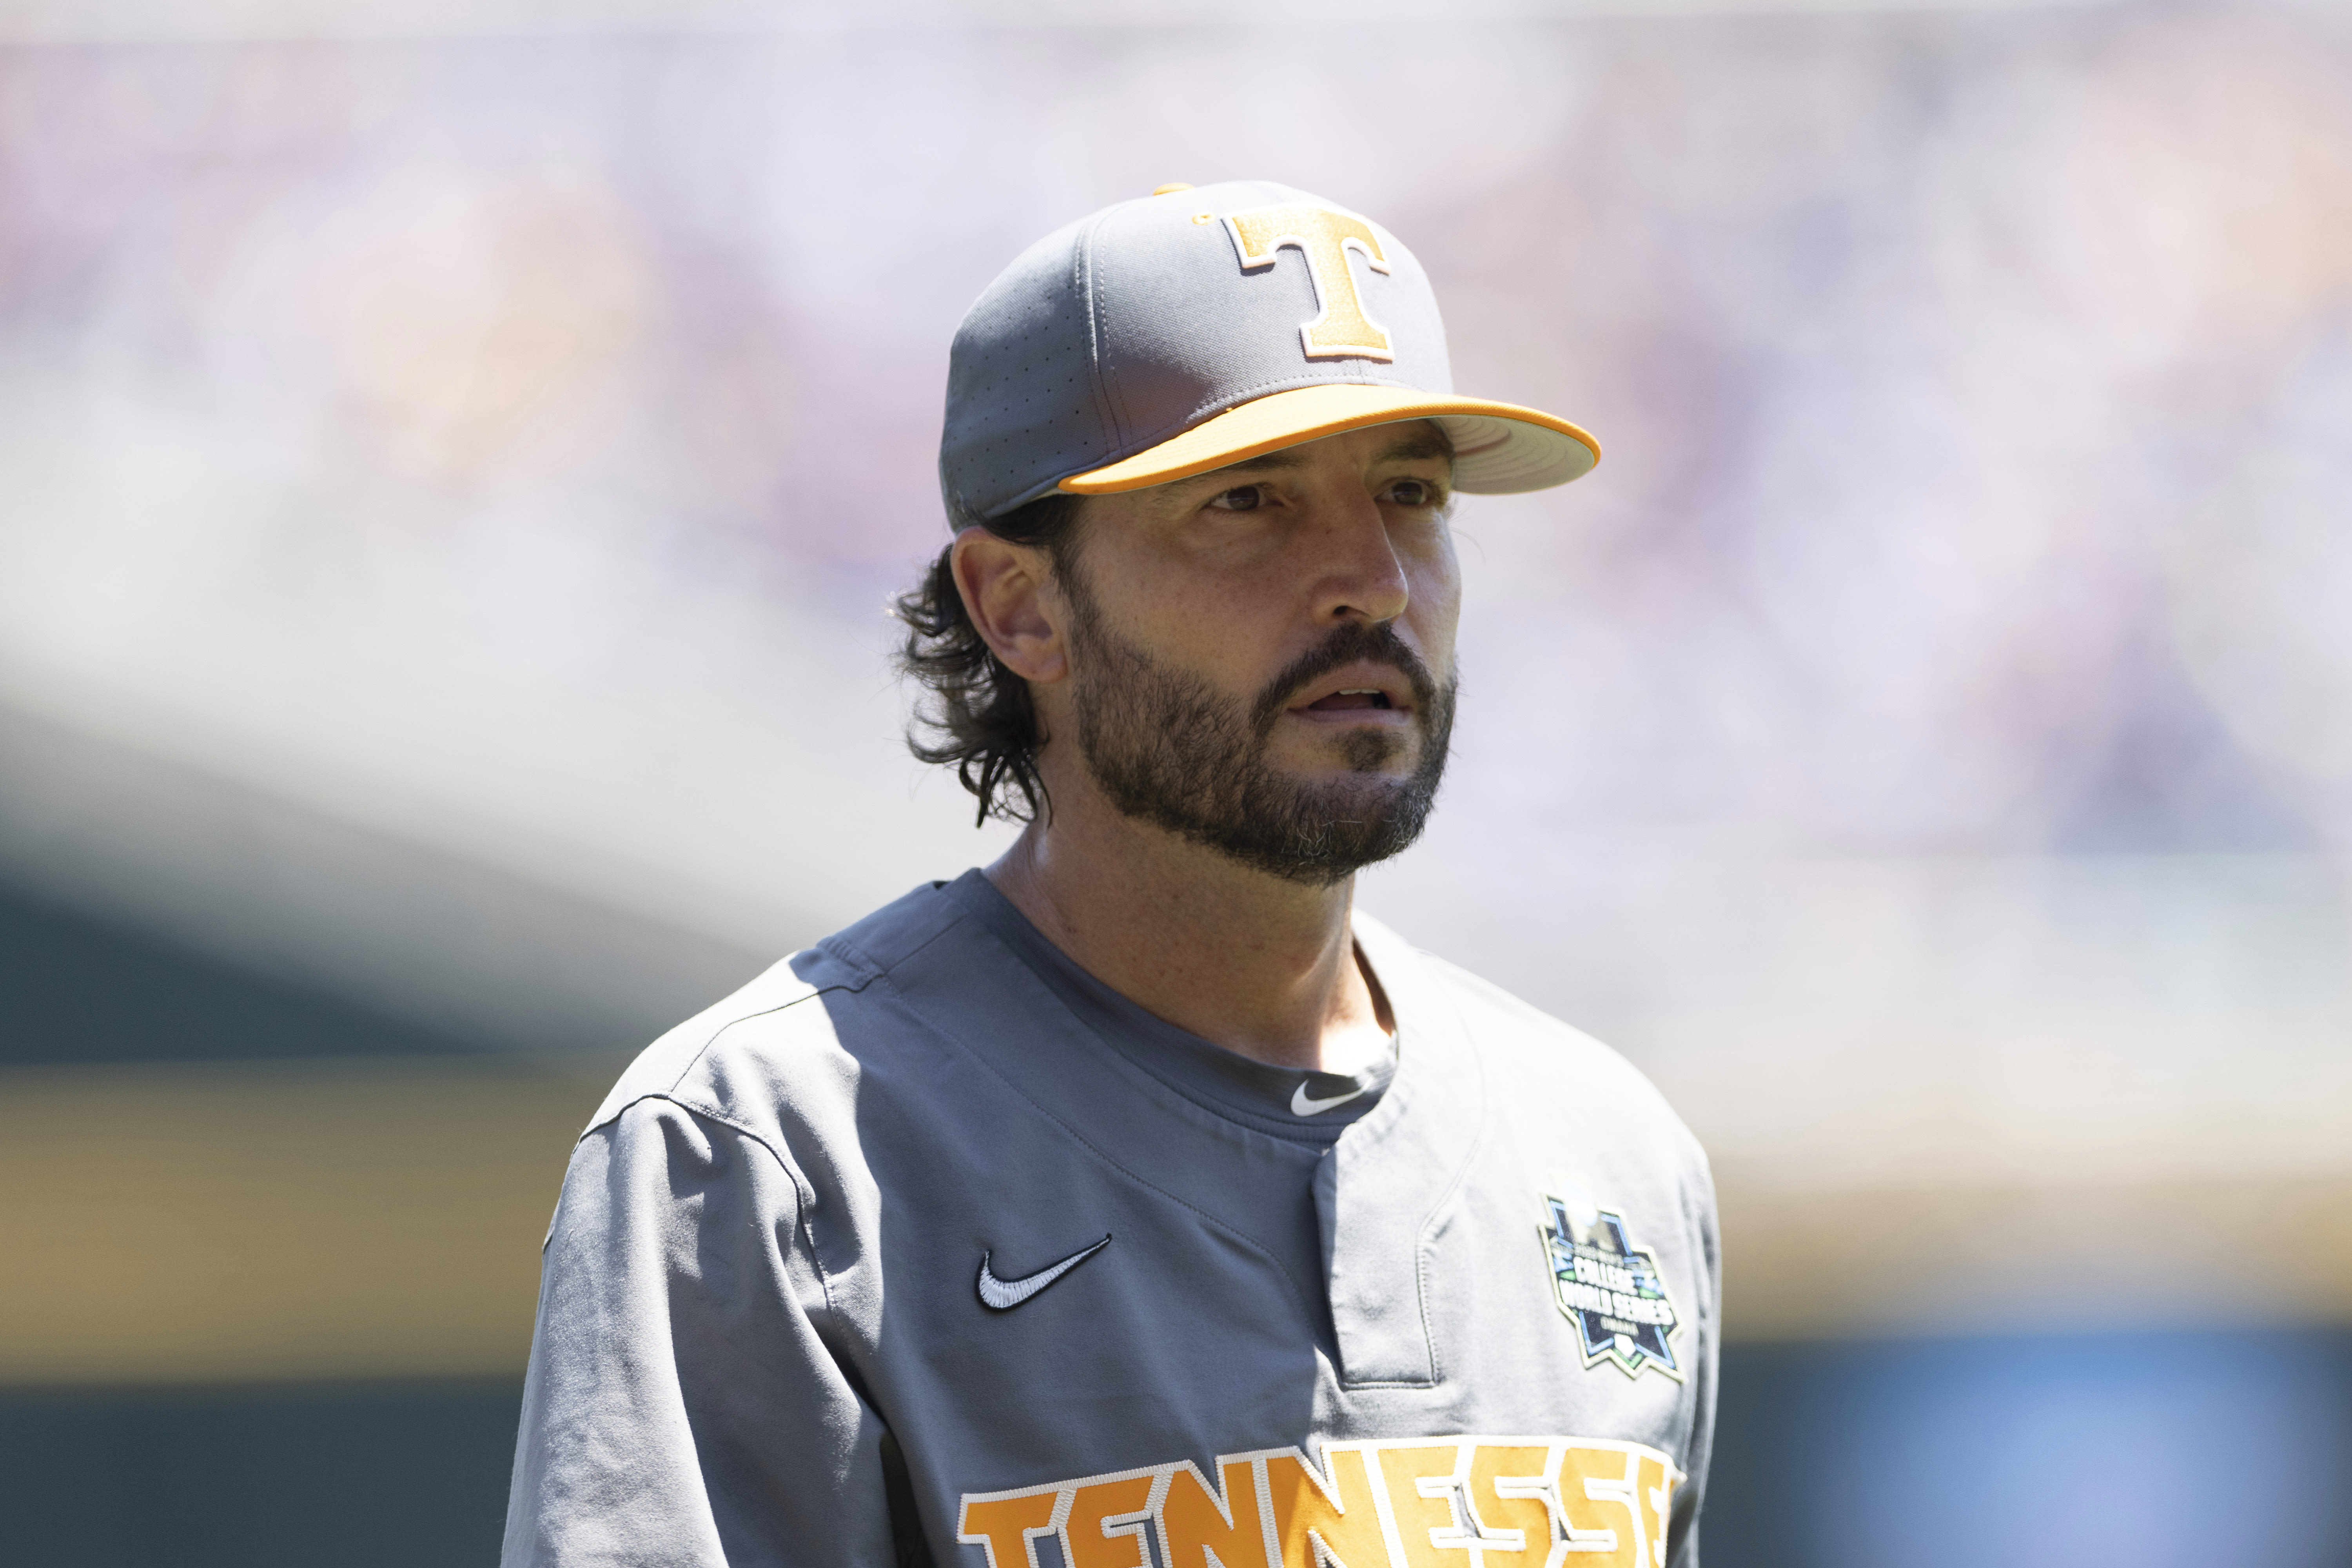 Tennessee earns No. 1 national seed for NCAA baseball tournament after sweeping SEC titles